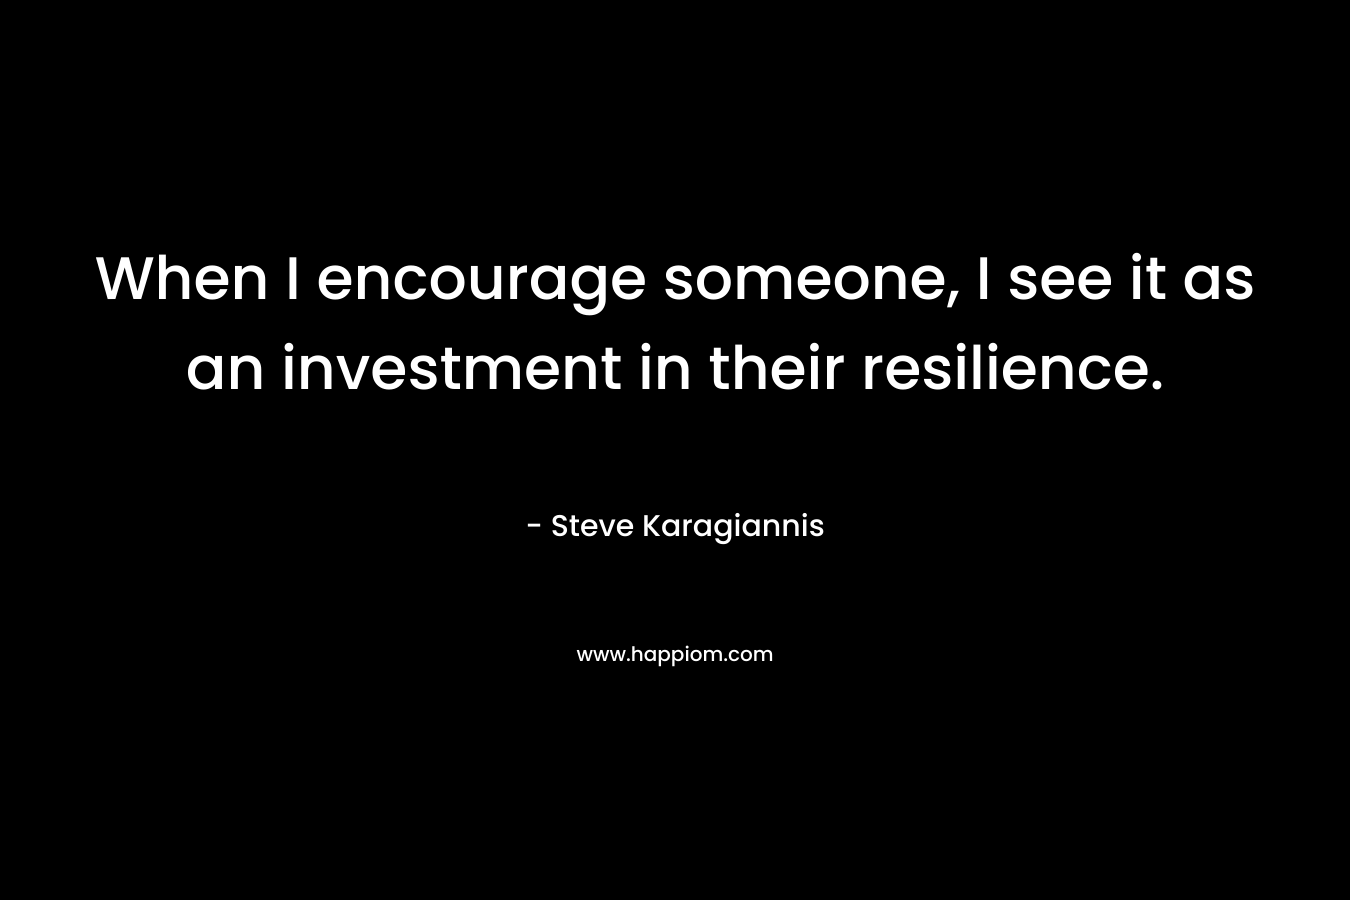 When I encourage someone, I see it as an investment in their resilience.